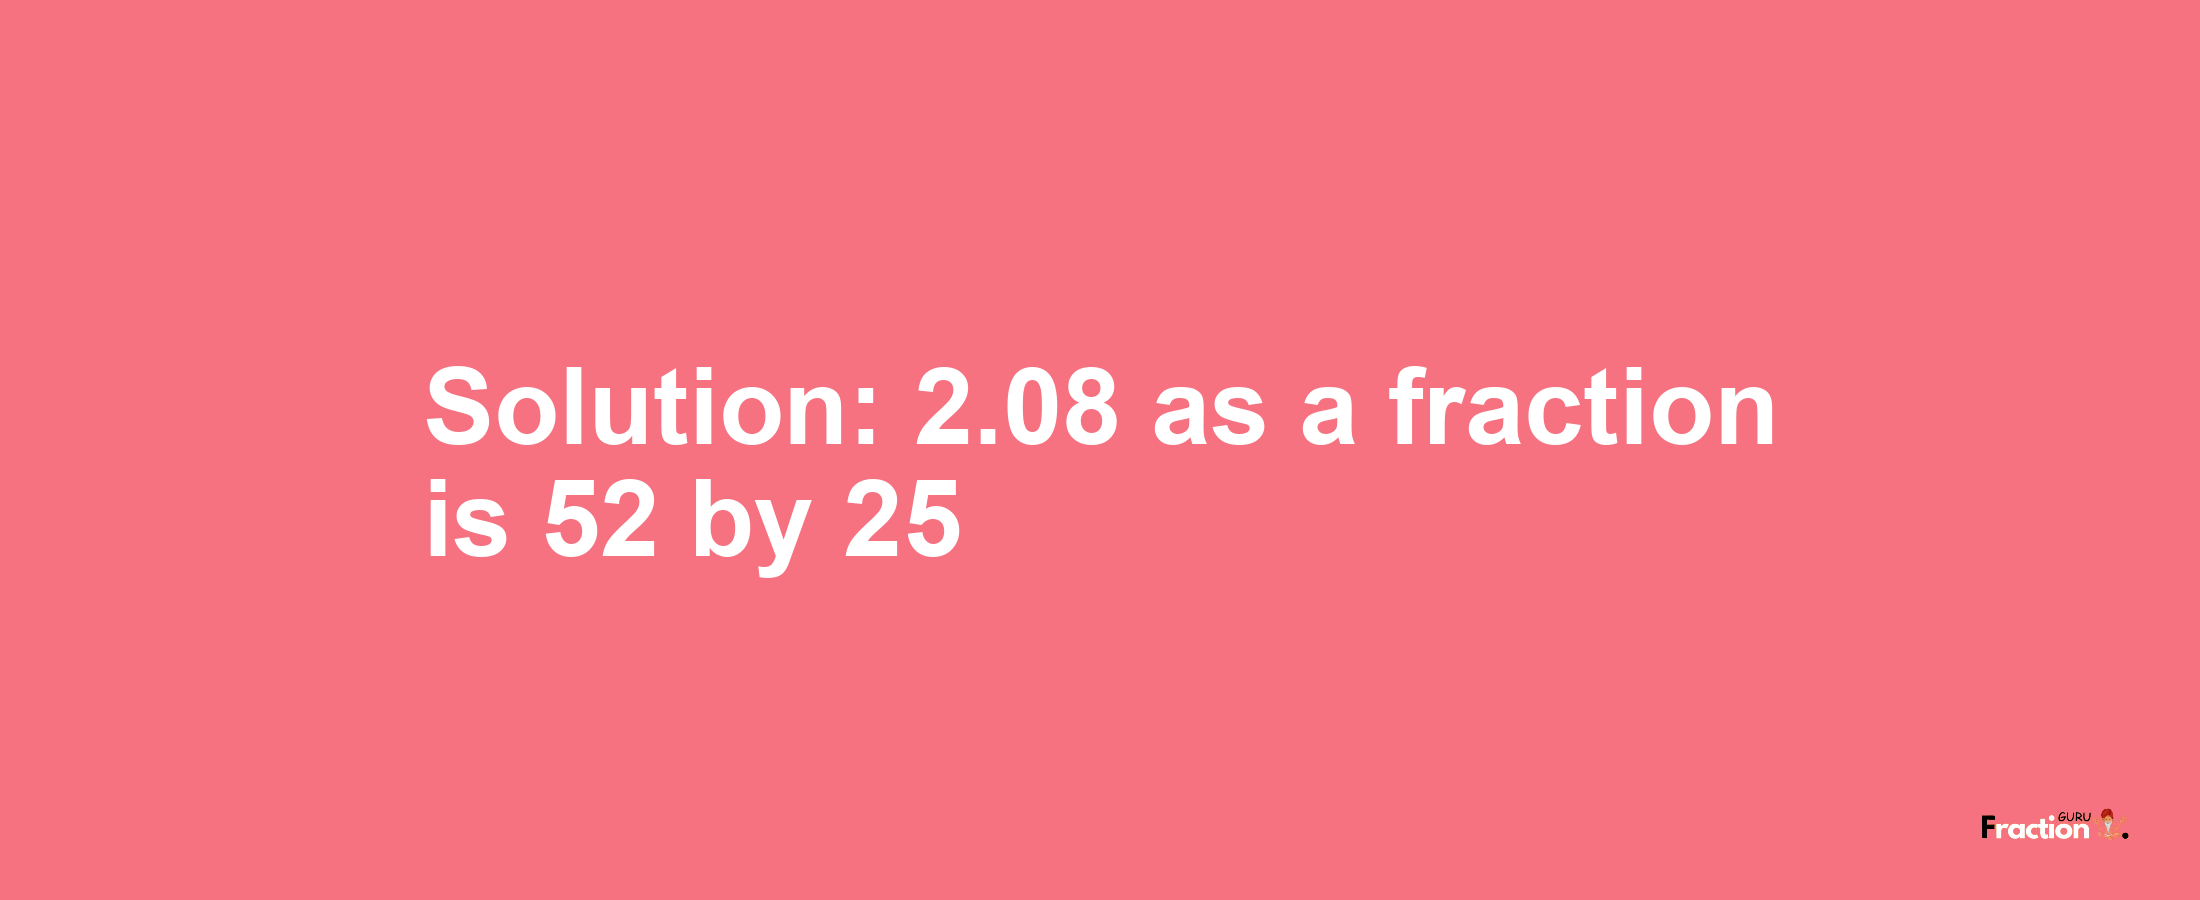 Solution:2.08 as a fraction is 52/25